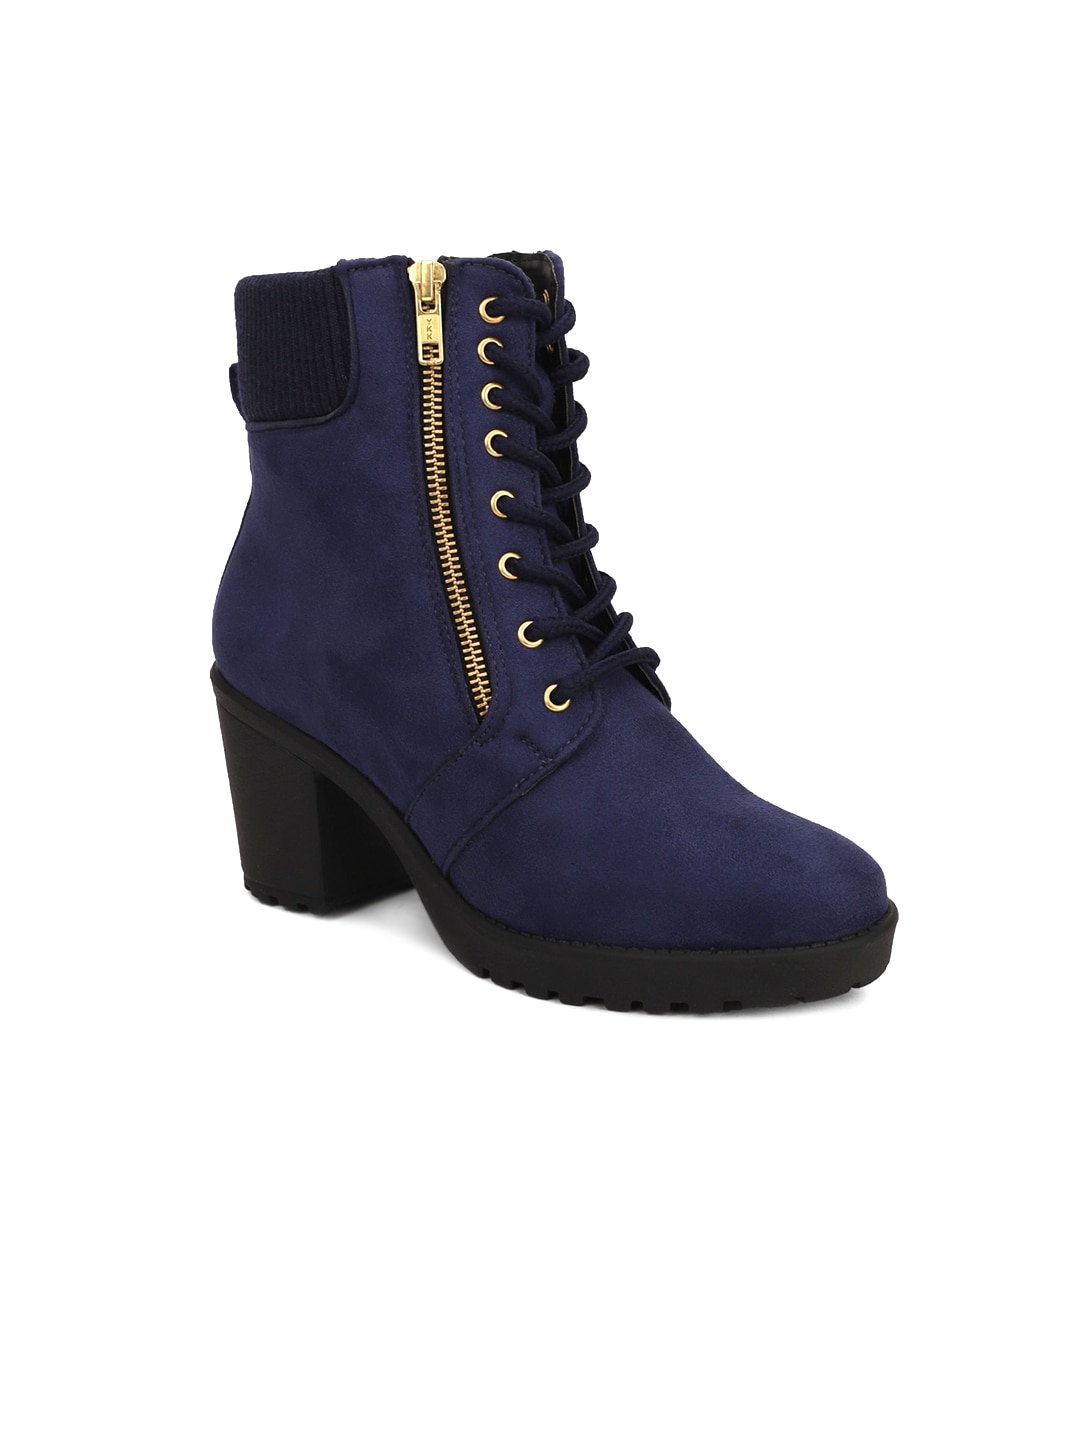 The Roadster Lifestyle Co Woman Navy Blue Suede Flat Boots Price in India